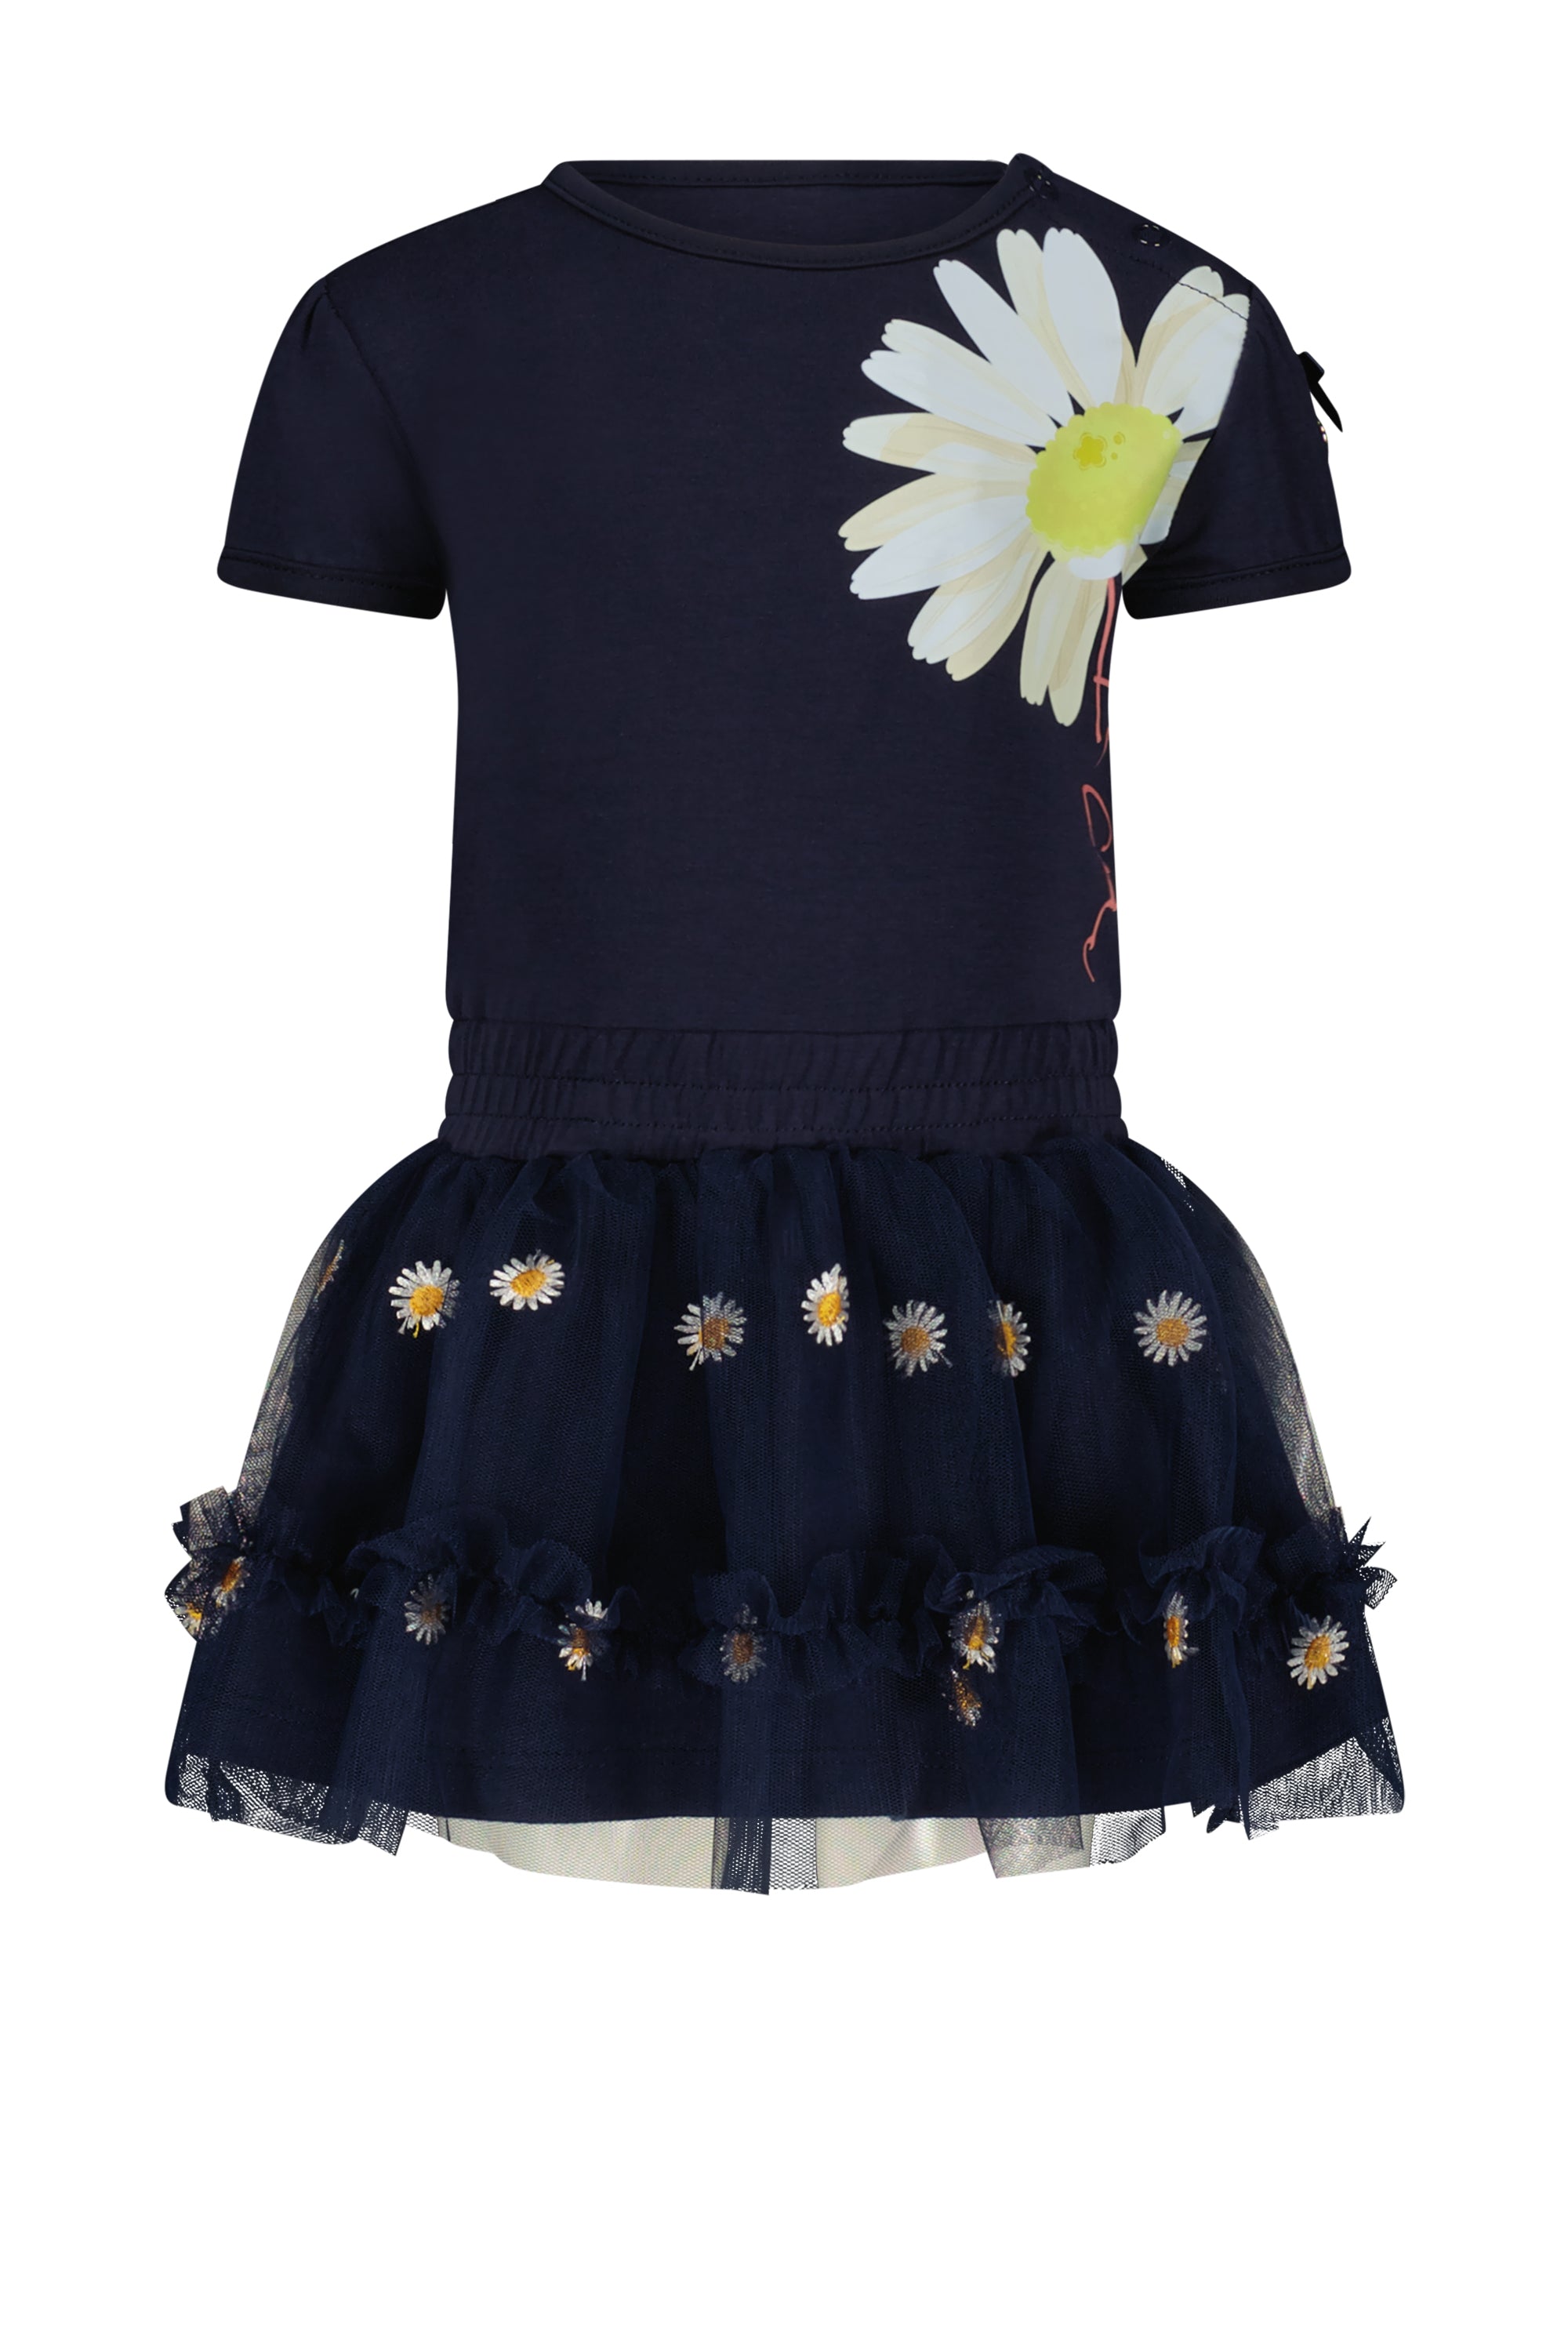 SQUIDIE daisy embroidery dress